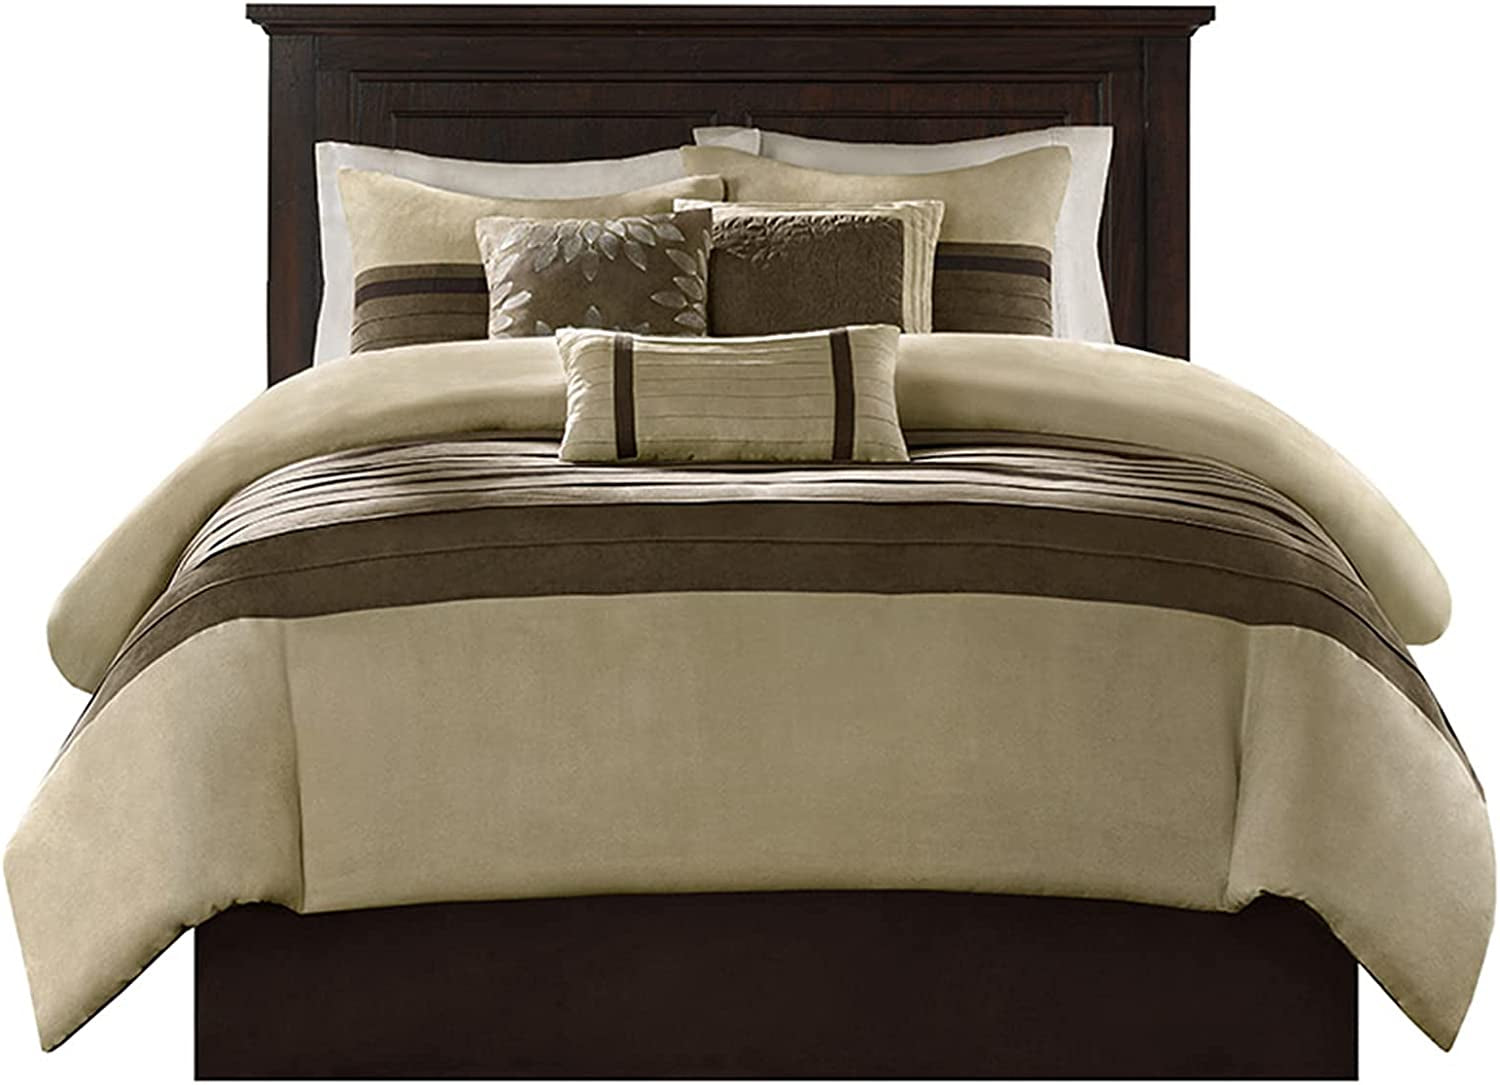 Palmer Comforter Set-Luxury Faux Suede Design, Striped Accent, All Season down Alternative Bedding, Matching Shams, Decorative Pillow, Bed Skirt, Queen (90 in X 90 In), Natural 7 Piece